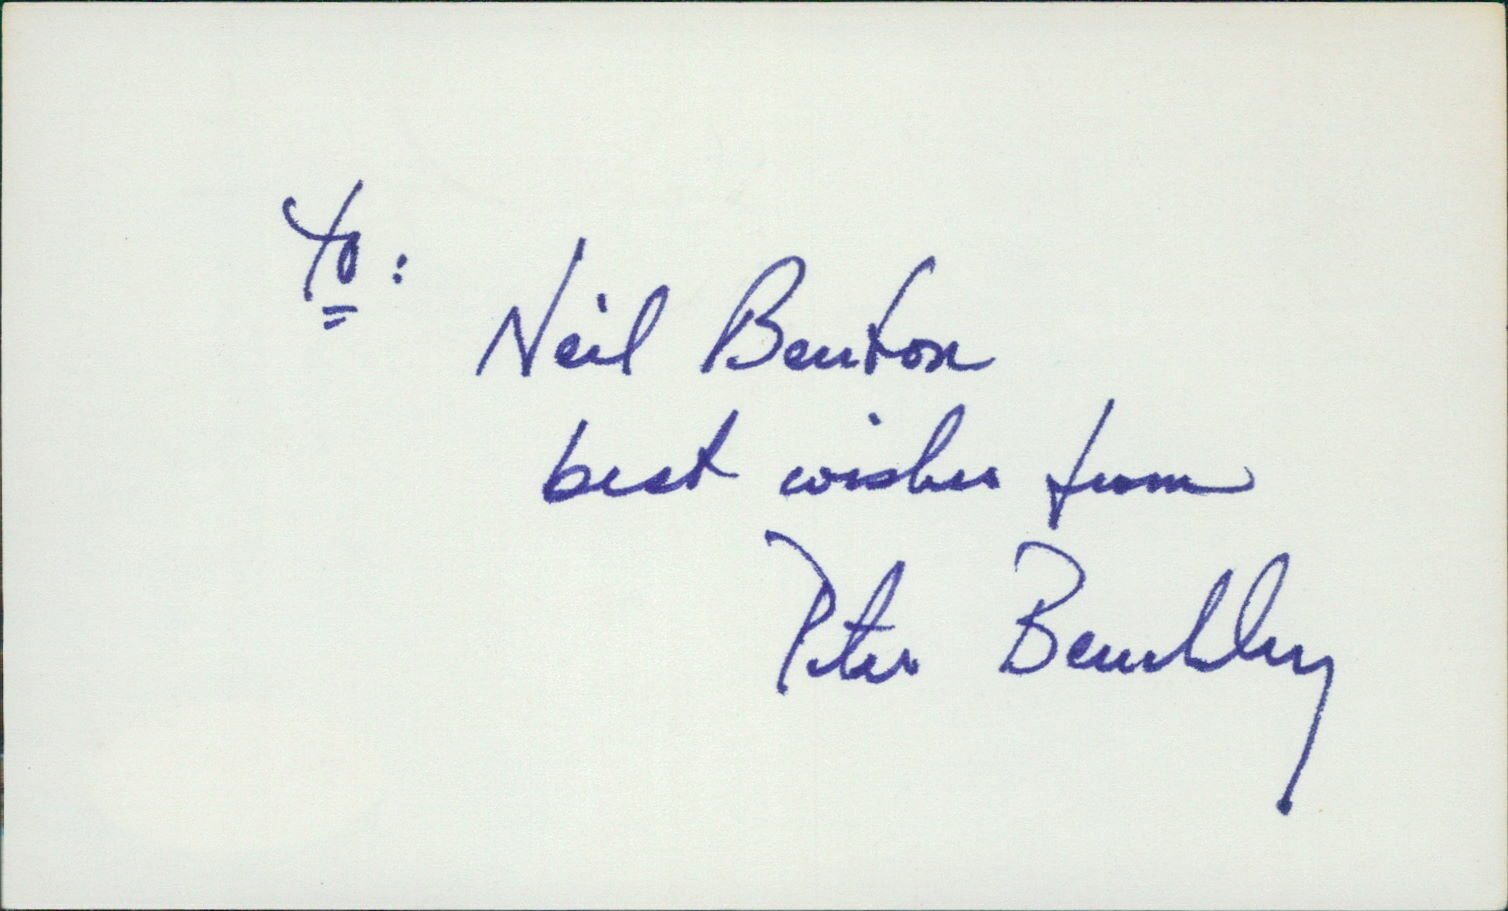 Peter Benchley Author Screenwriter Signed 3x5 Index Card JSA Authenticated